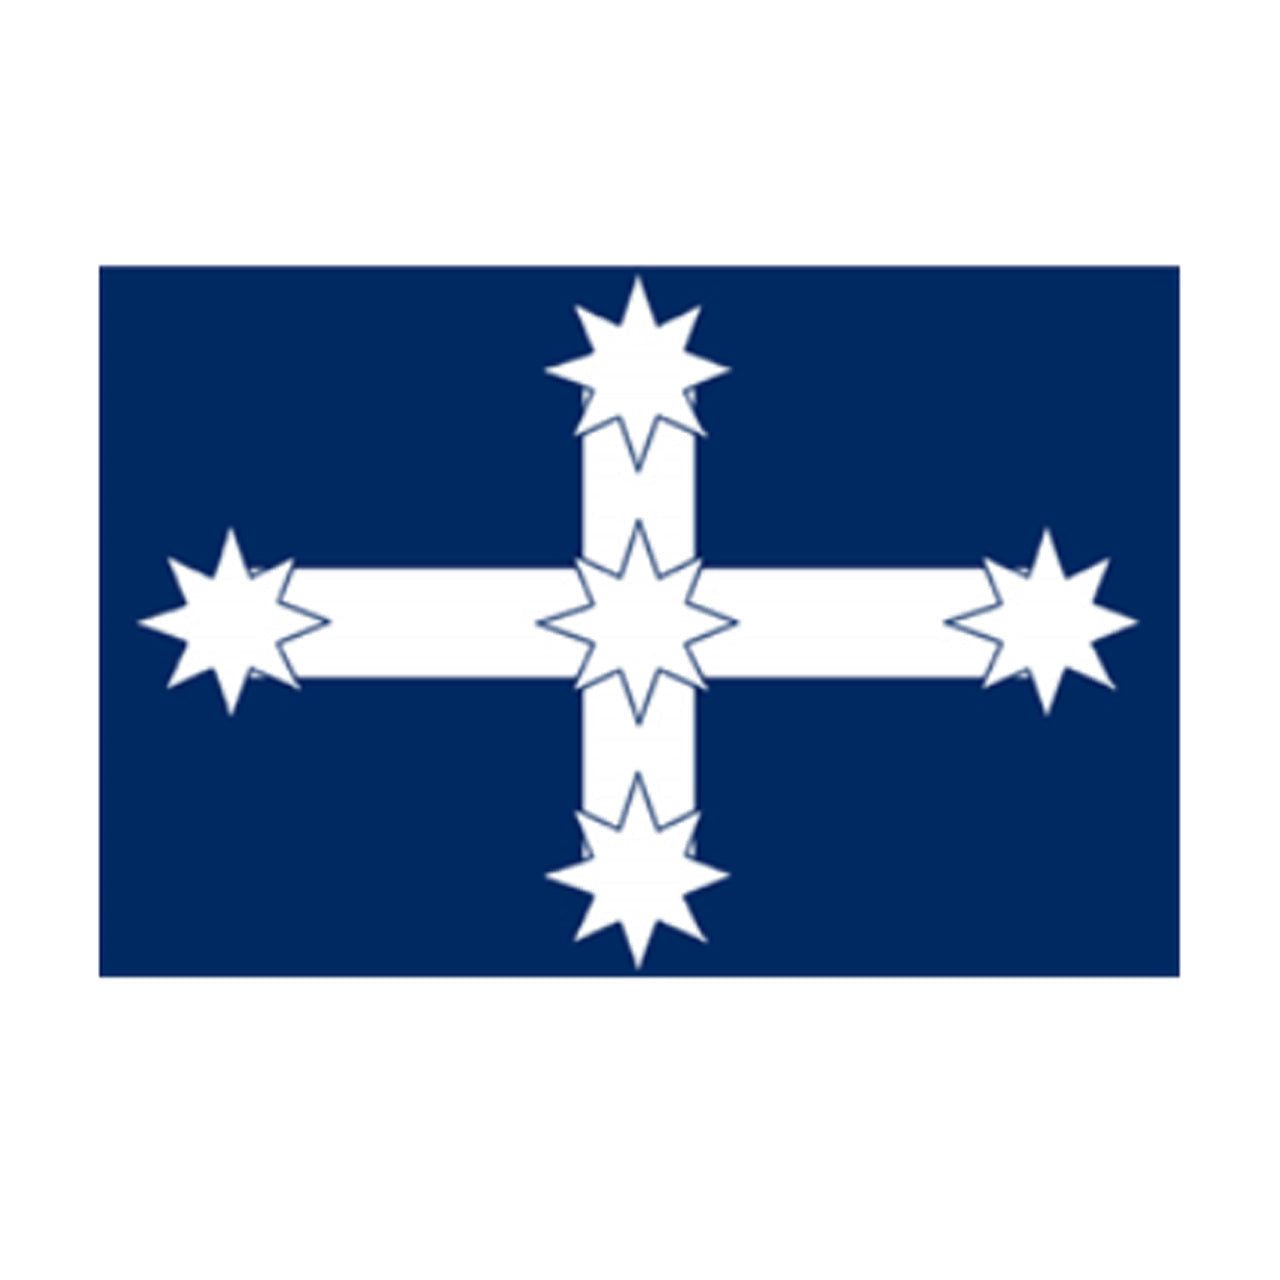 The Eureka flag, flown by the miners at the Eureka stockade features a white cross with stars at each end on a blue background. The original flag was supposedly made from the woollen and cotton petticoats of the miners wives and is still viewable today, although only two thirds of the original flag remain.      100% 68D Polyester     150cm x 90cm www.defenceqstore.com.au